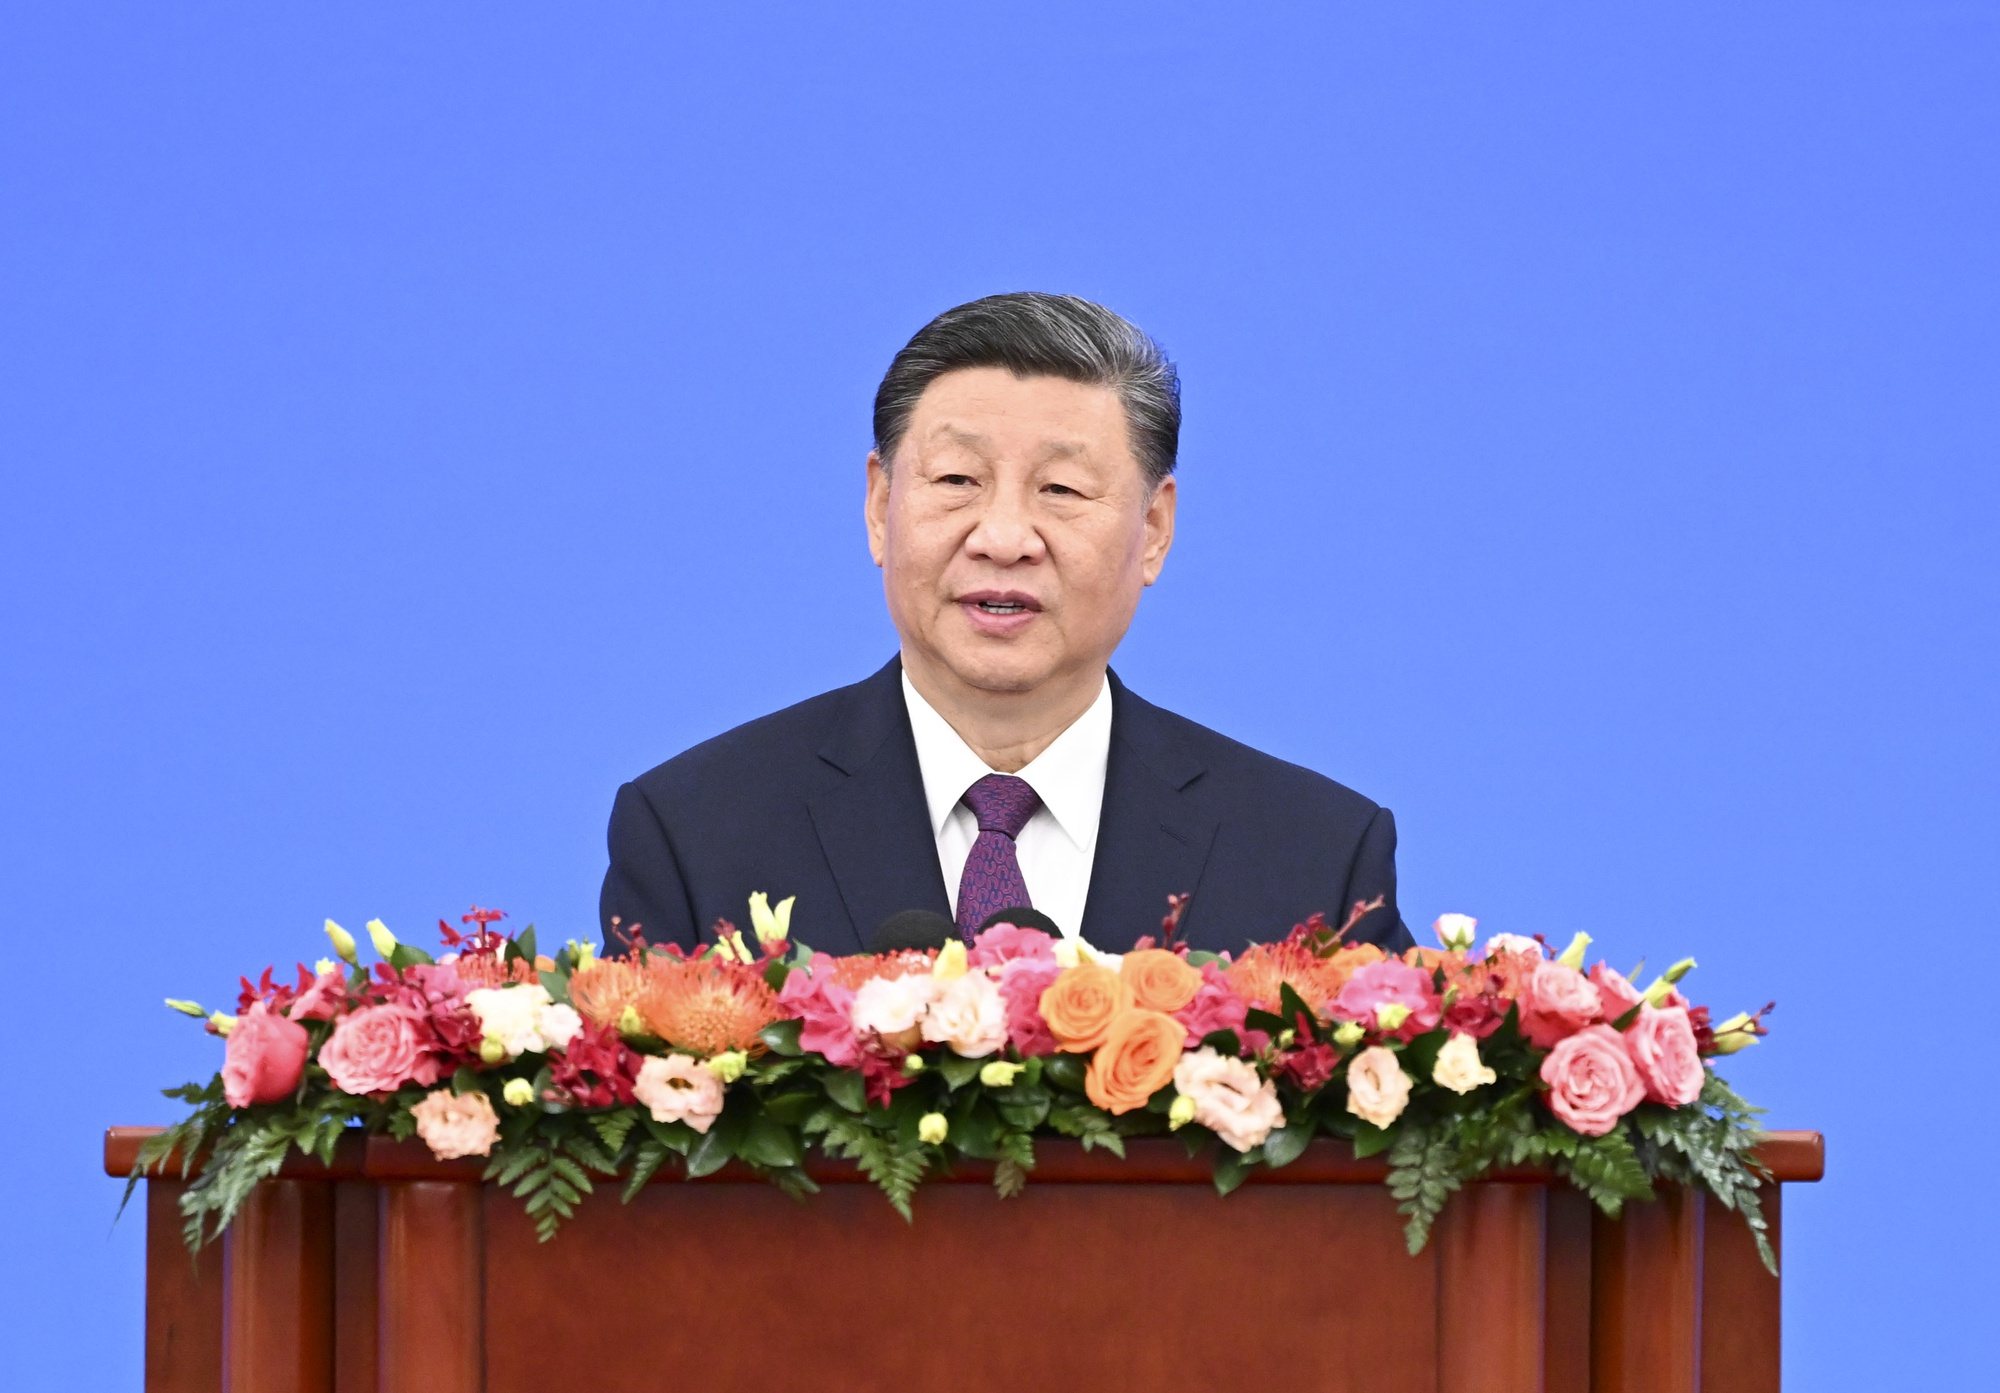 epa11443502 Chinese President Xi Jinping attends the Conference Marking the 70th Anniversary of the Five Principles of Peaceful Coexistence and delivers a speech titled &quot;Carrying Forward the Five Principles of Peaceful Coexistence and Jointly Building a Community with a Shared Future for Mankind&quot; at the Great Hall of the People in Beijing, China, 28 June 2024.  EPA/XINHUA / Zhang Ling CHINA OUT / UK AND IRELAND OUT  /       MANDATORY CREDIT  EDITORIAL USE ONLY  EDITORIAL USE ONLY